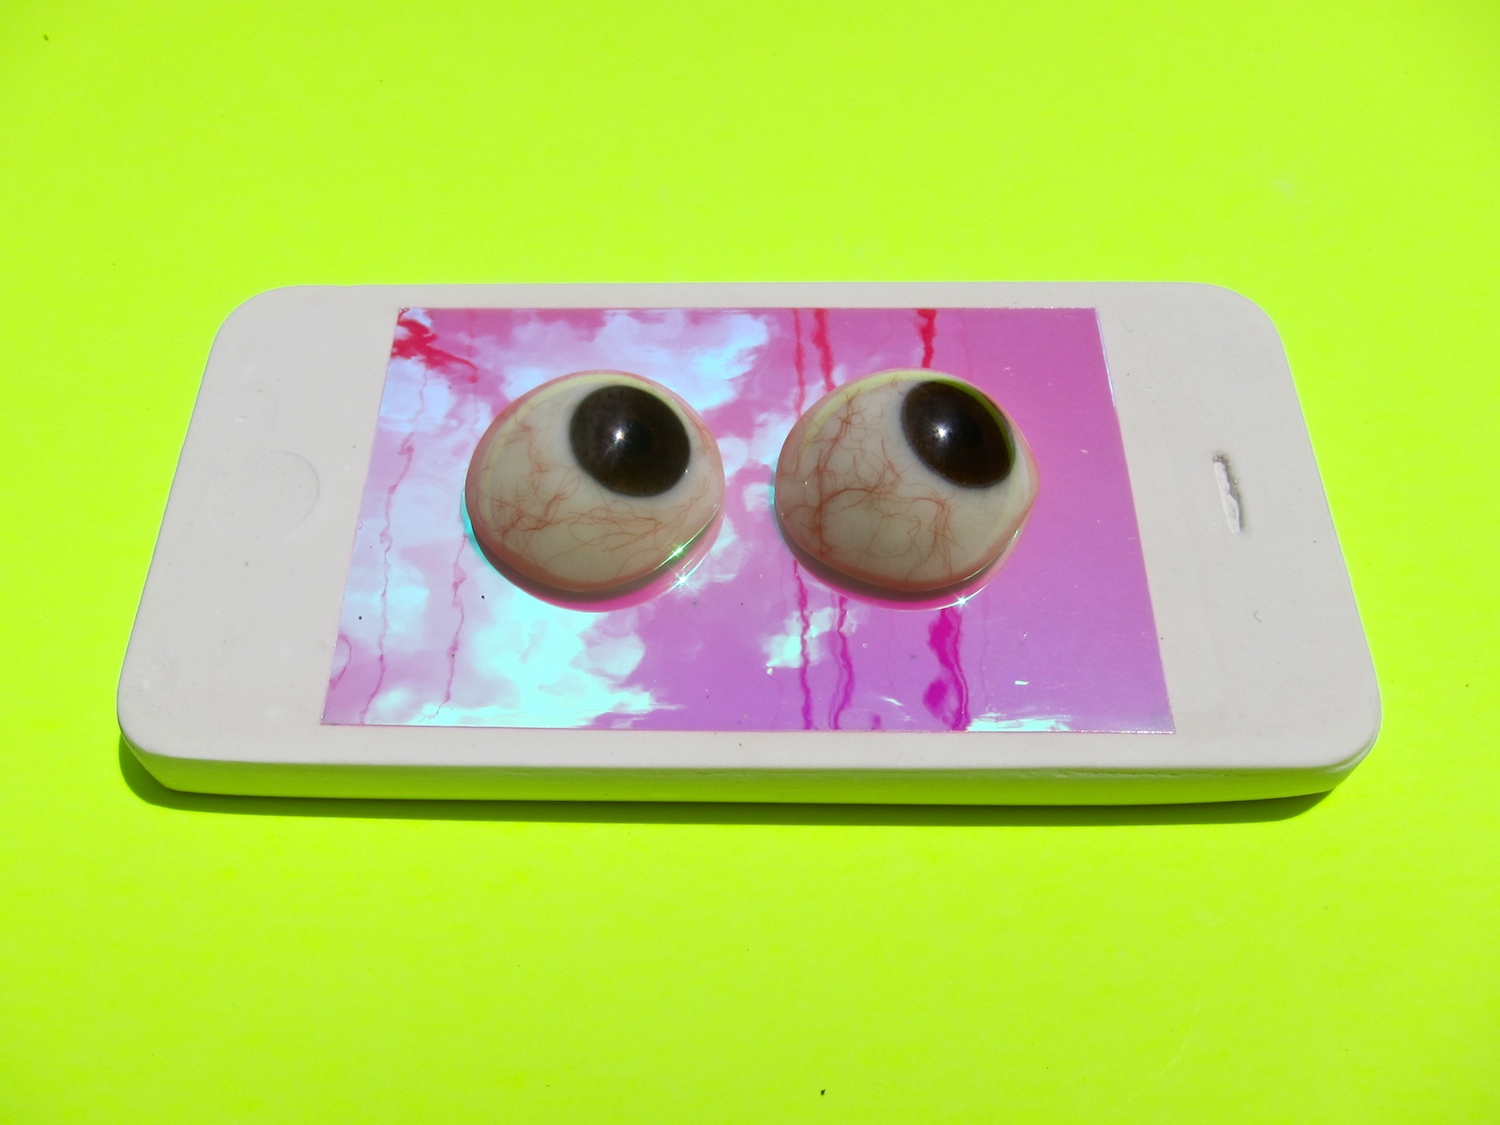   we see you watching us  (2017) cast hydrocal, dichroic film, prosthetic eyeballs 